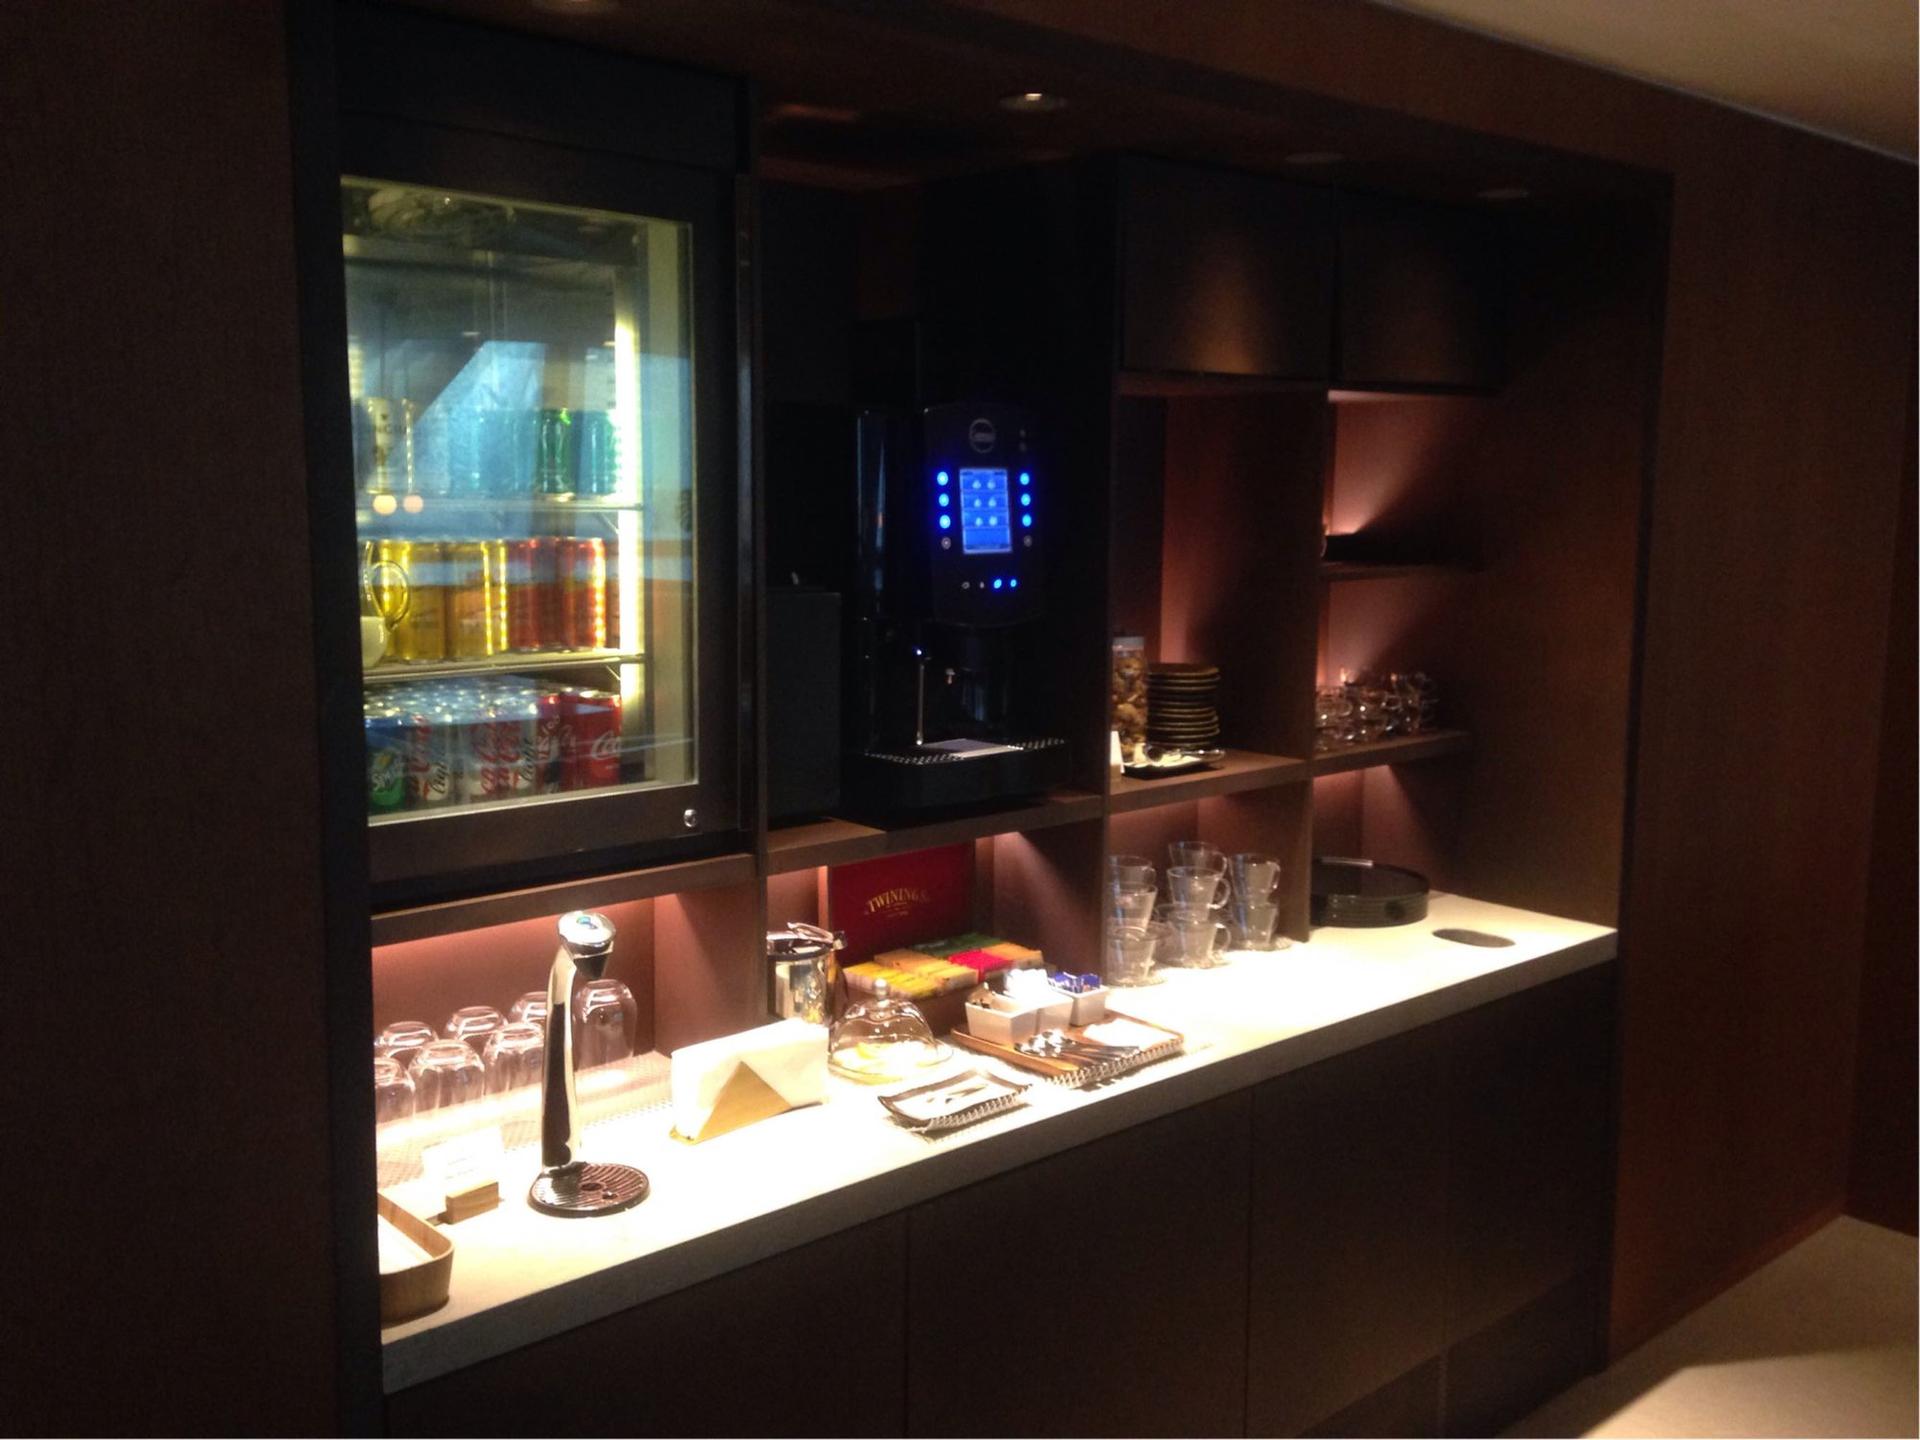 Cathay Pacific First and Business Class Lounge image 16 of 69